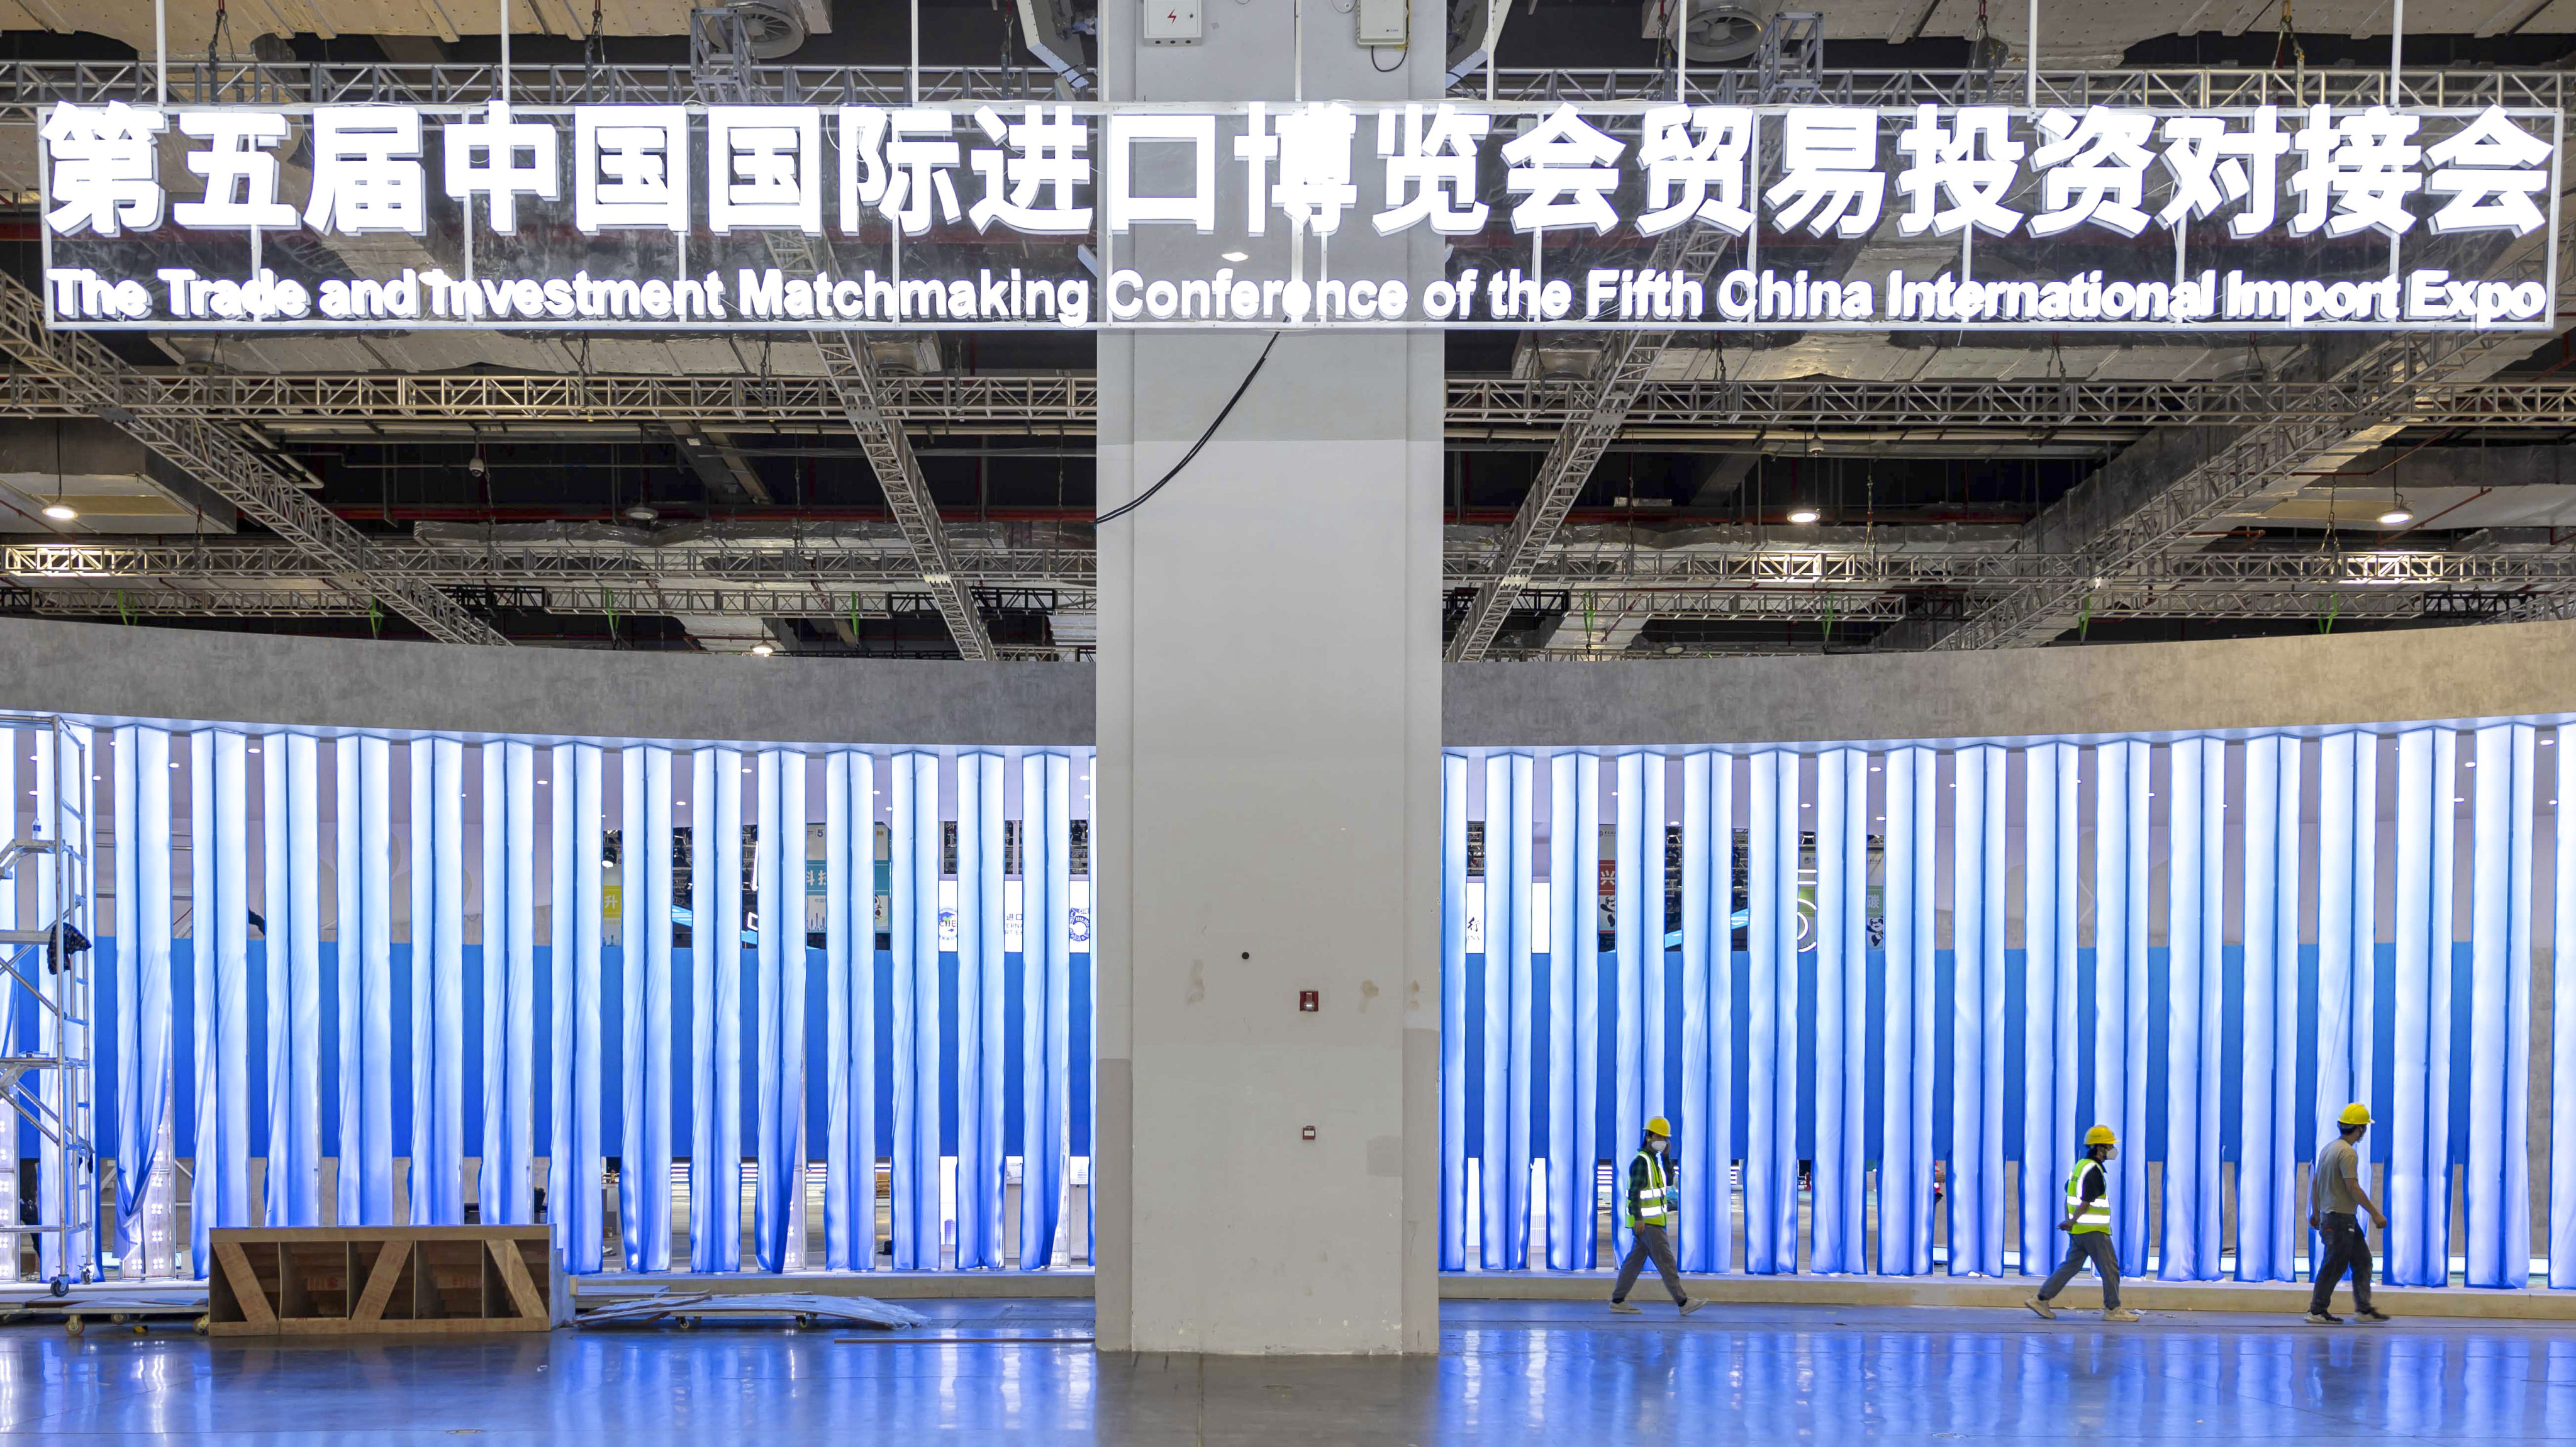 An exhibition area is pictured at the National Exhibition and Convention Center (Shanghai), the main venue the China International Import Expo (CIIE). Photo: Xinhua